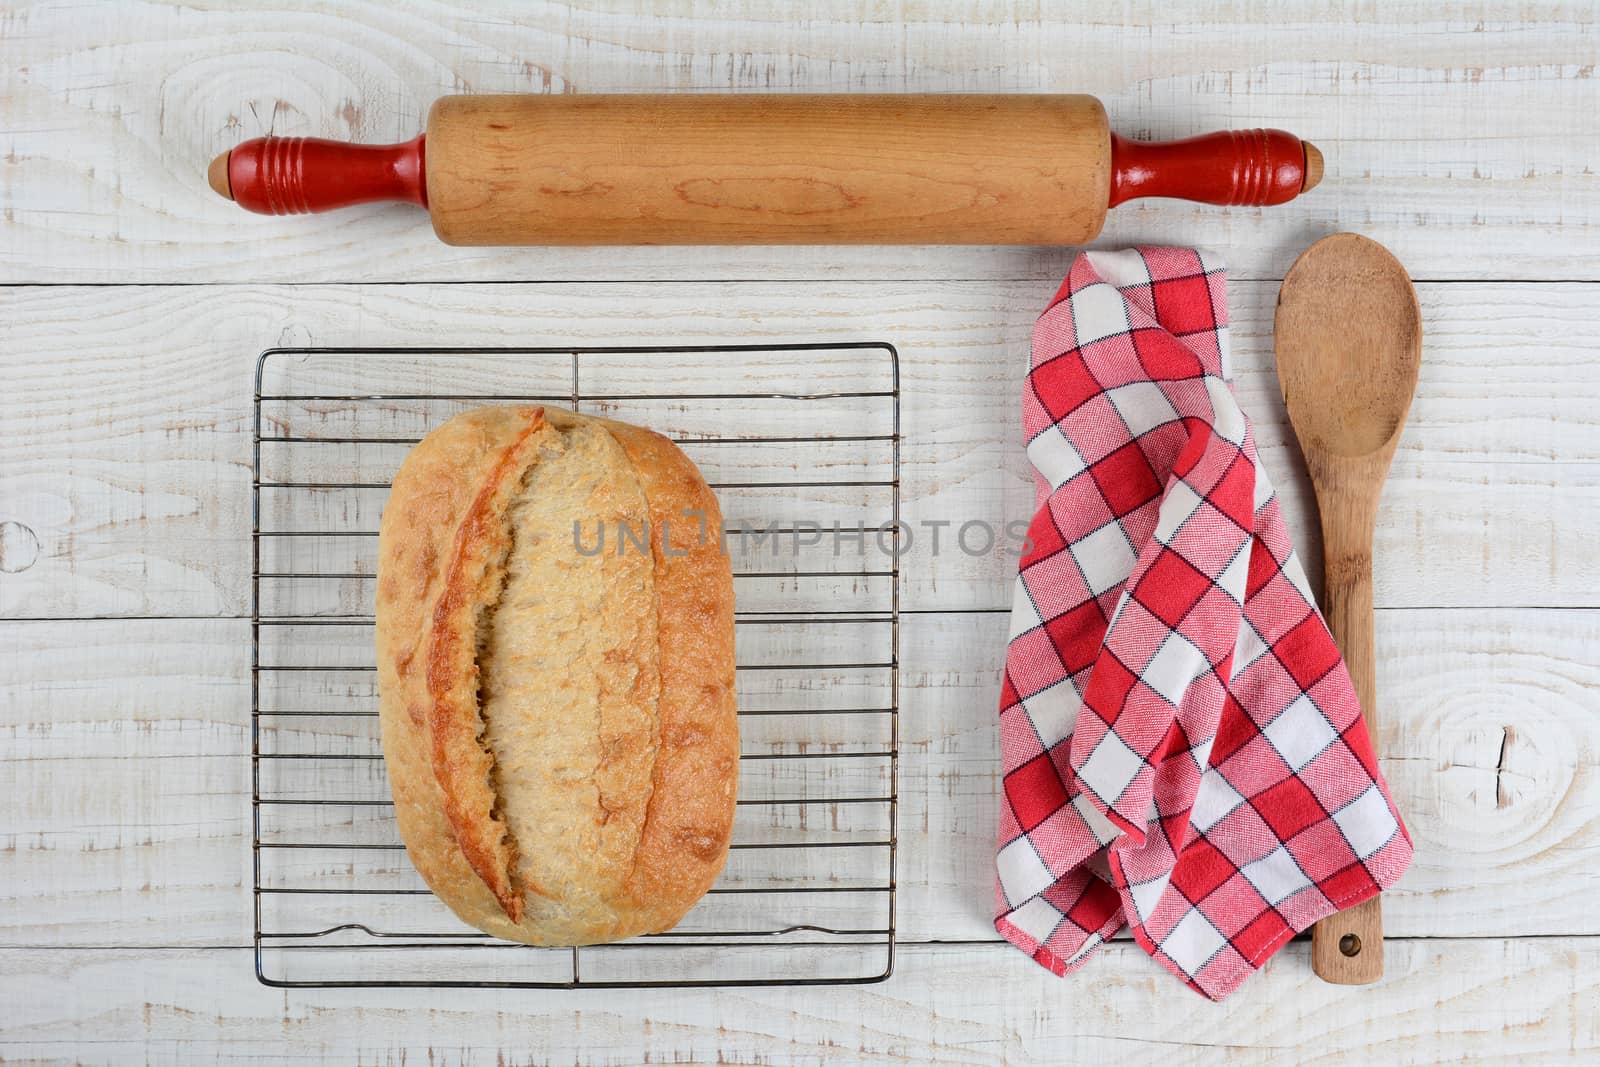 High angle shot of a fresh baked loaf of bread on a cooling rack with a rolling pin, red and white checkered napkin and wooden spoon, Horizontal format on a rustic white wood table.